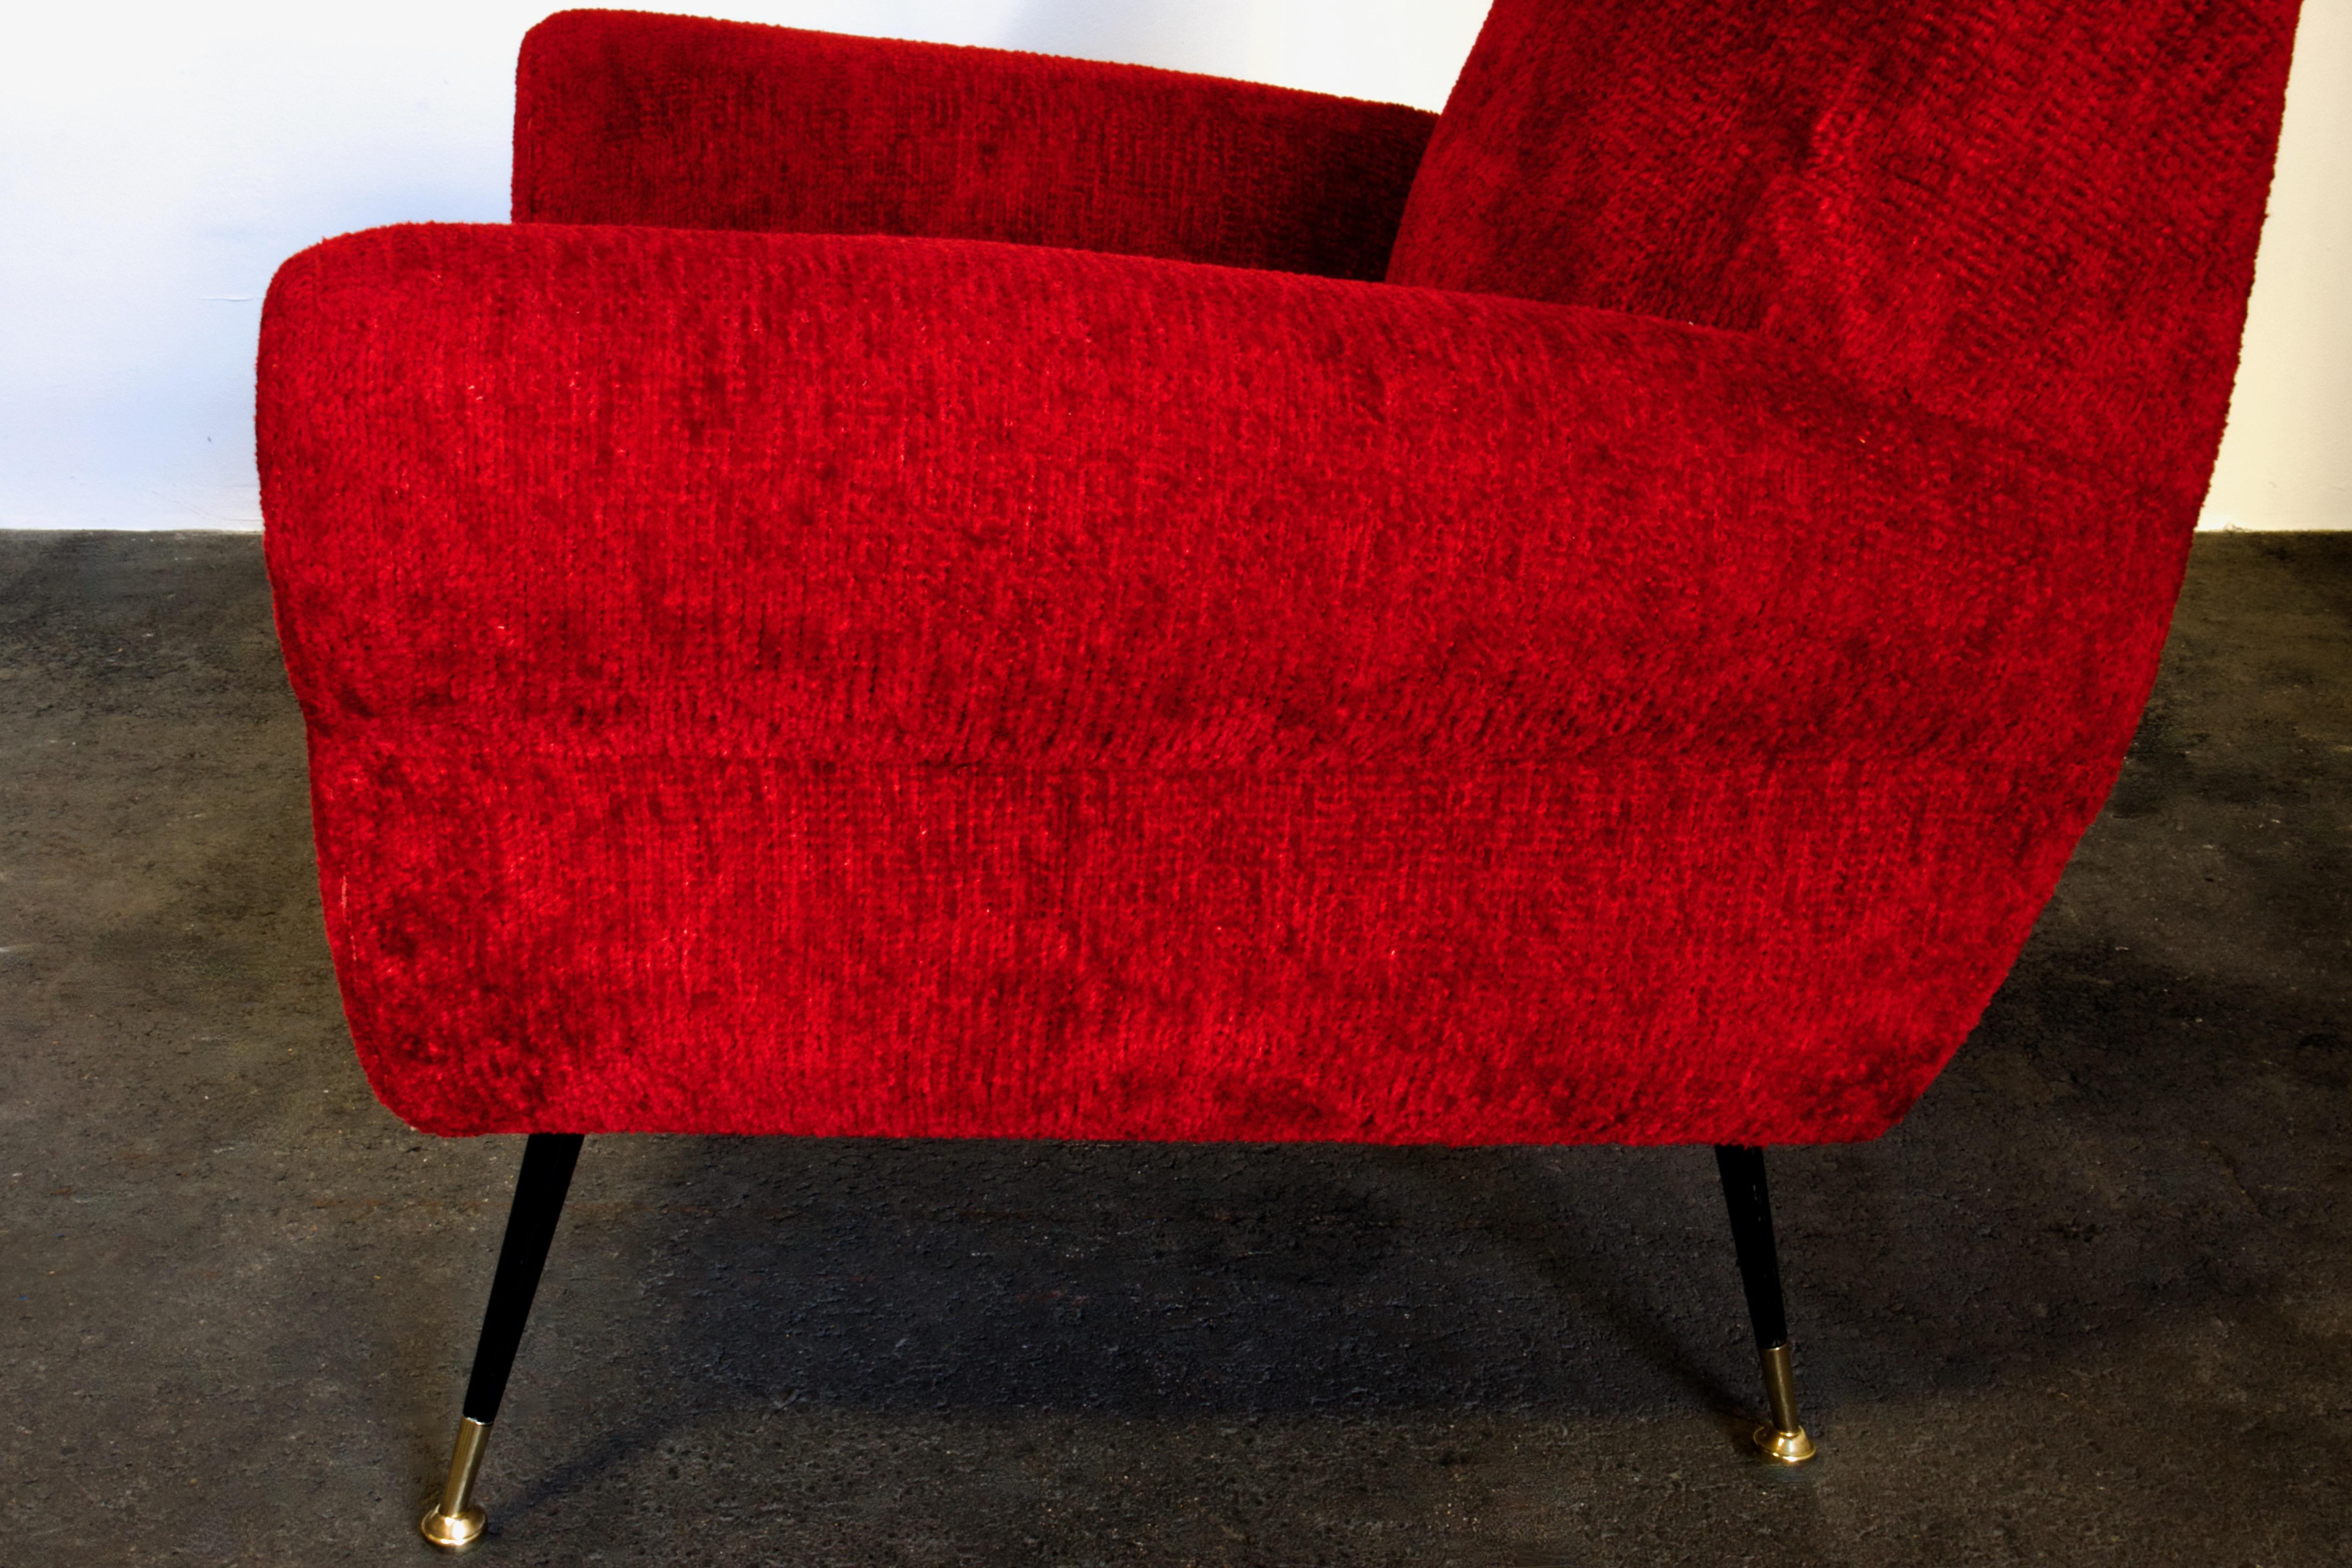 Pair of Gigi Radice Club / Lounge Armchairs for Minotti, 1950s Italy, Red Fabric For Sale 2